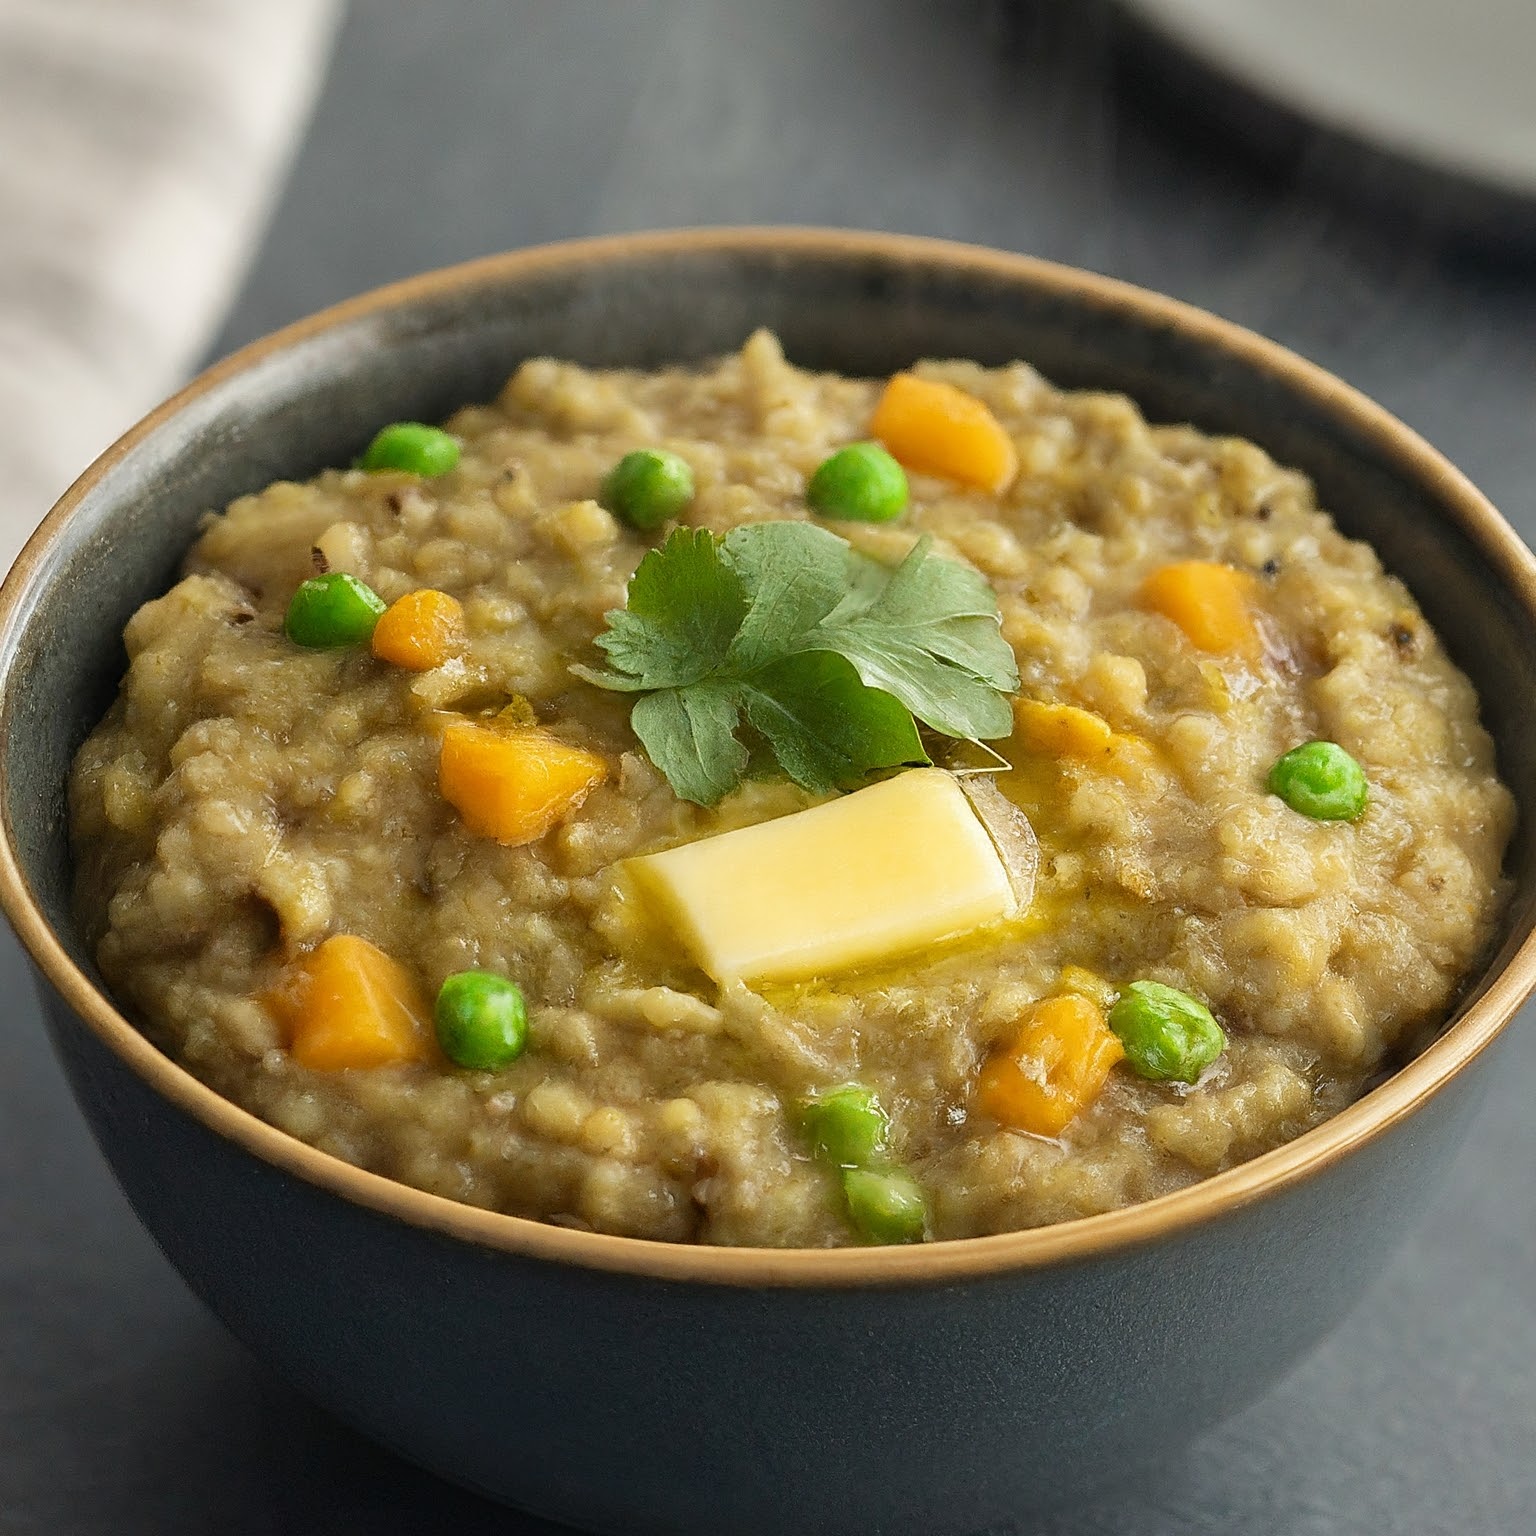 Steaming bowl of Bajra Khichdi, an Indian dish with pearl millet, lentils, vegetables, cilantro, and ghee.